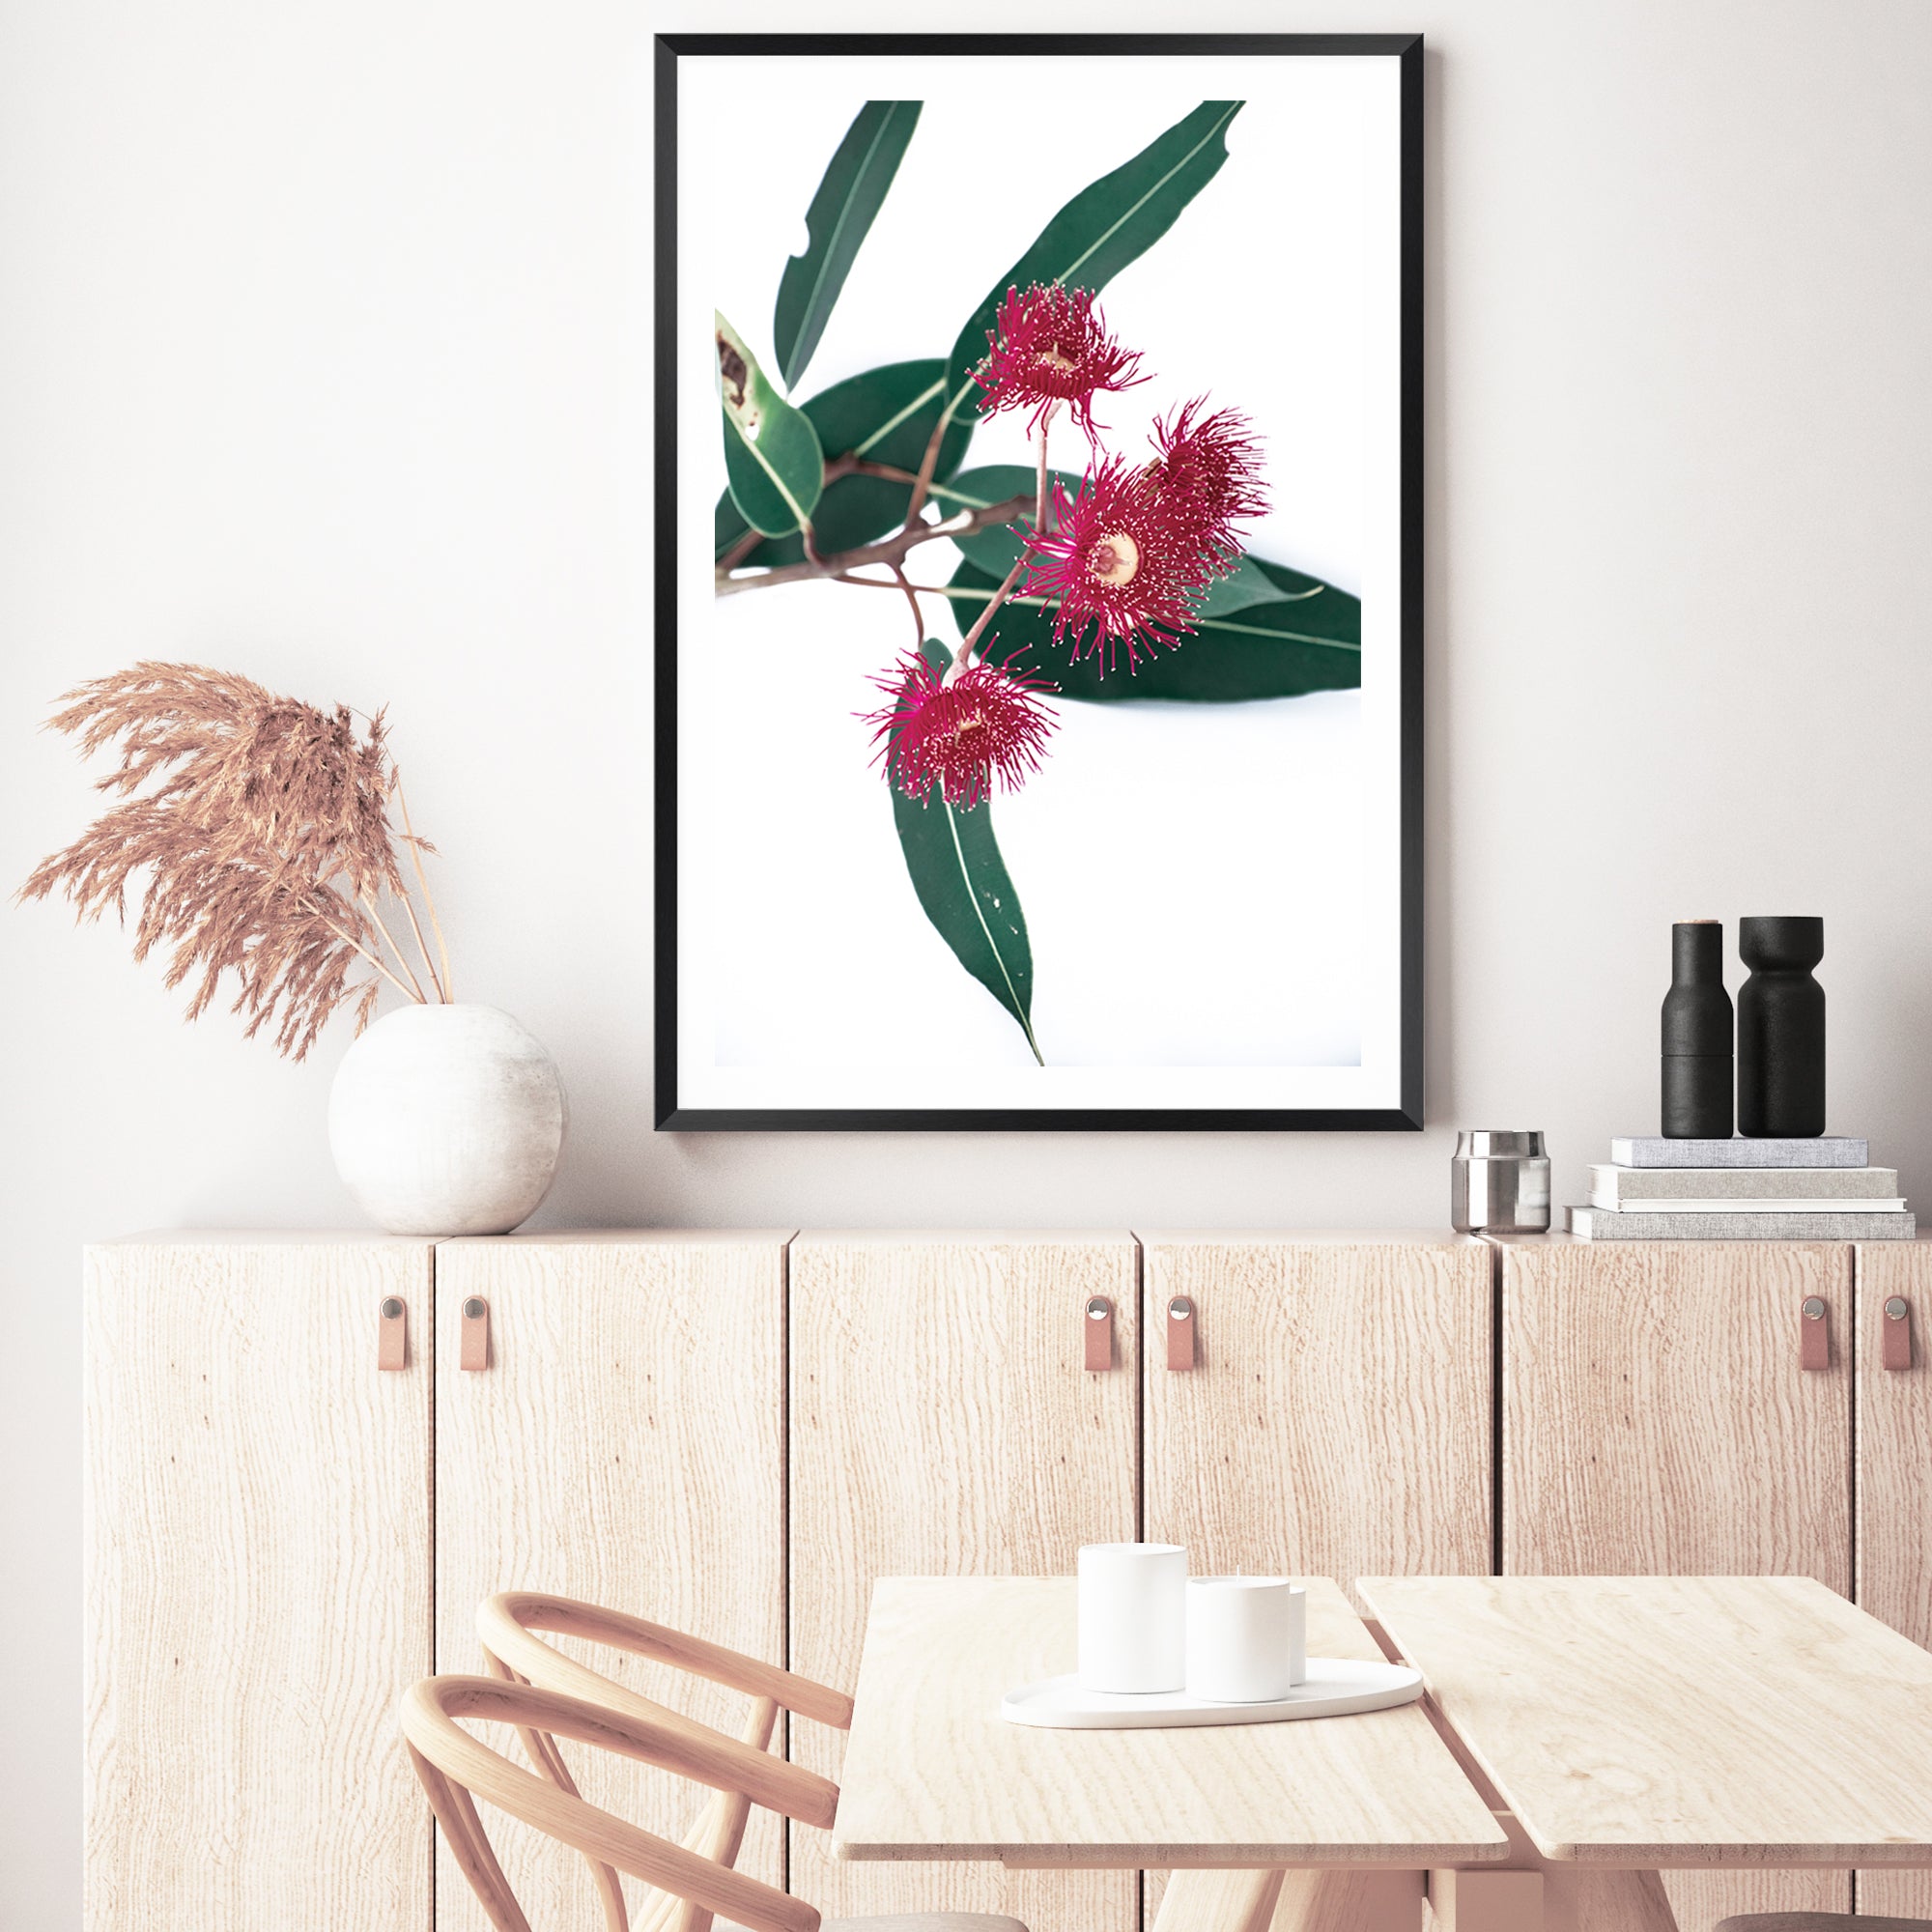 This floral art print features green eucalyptus leaves highlighting beautiful red wild flowers, available with a timber, black or white frame.